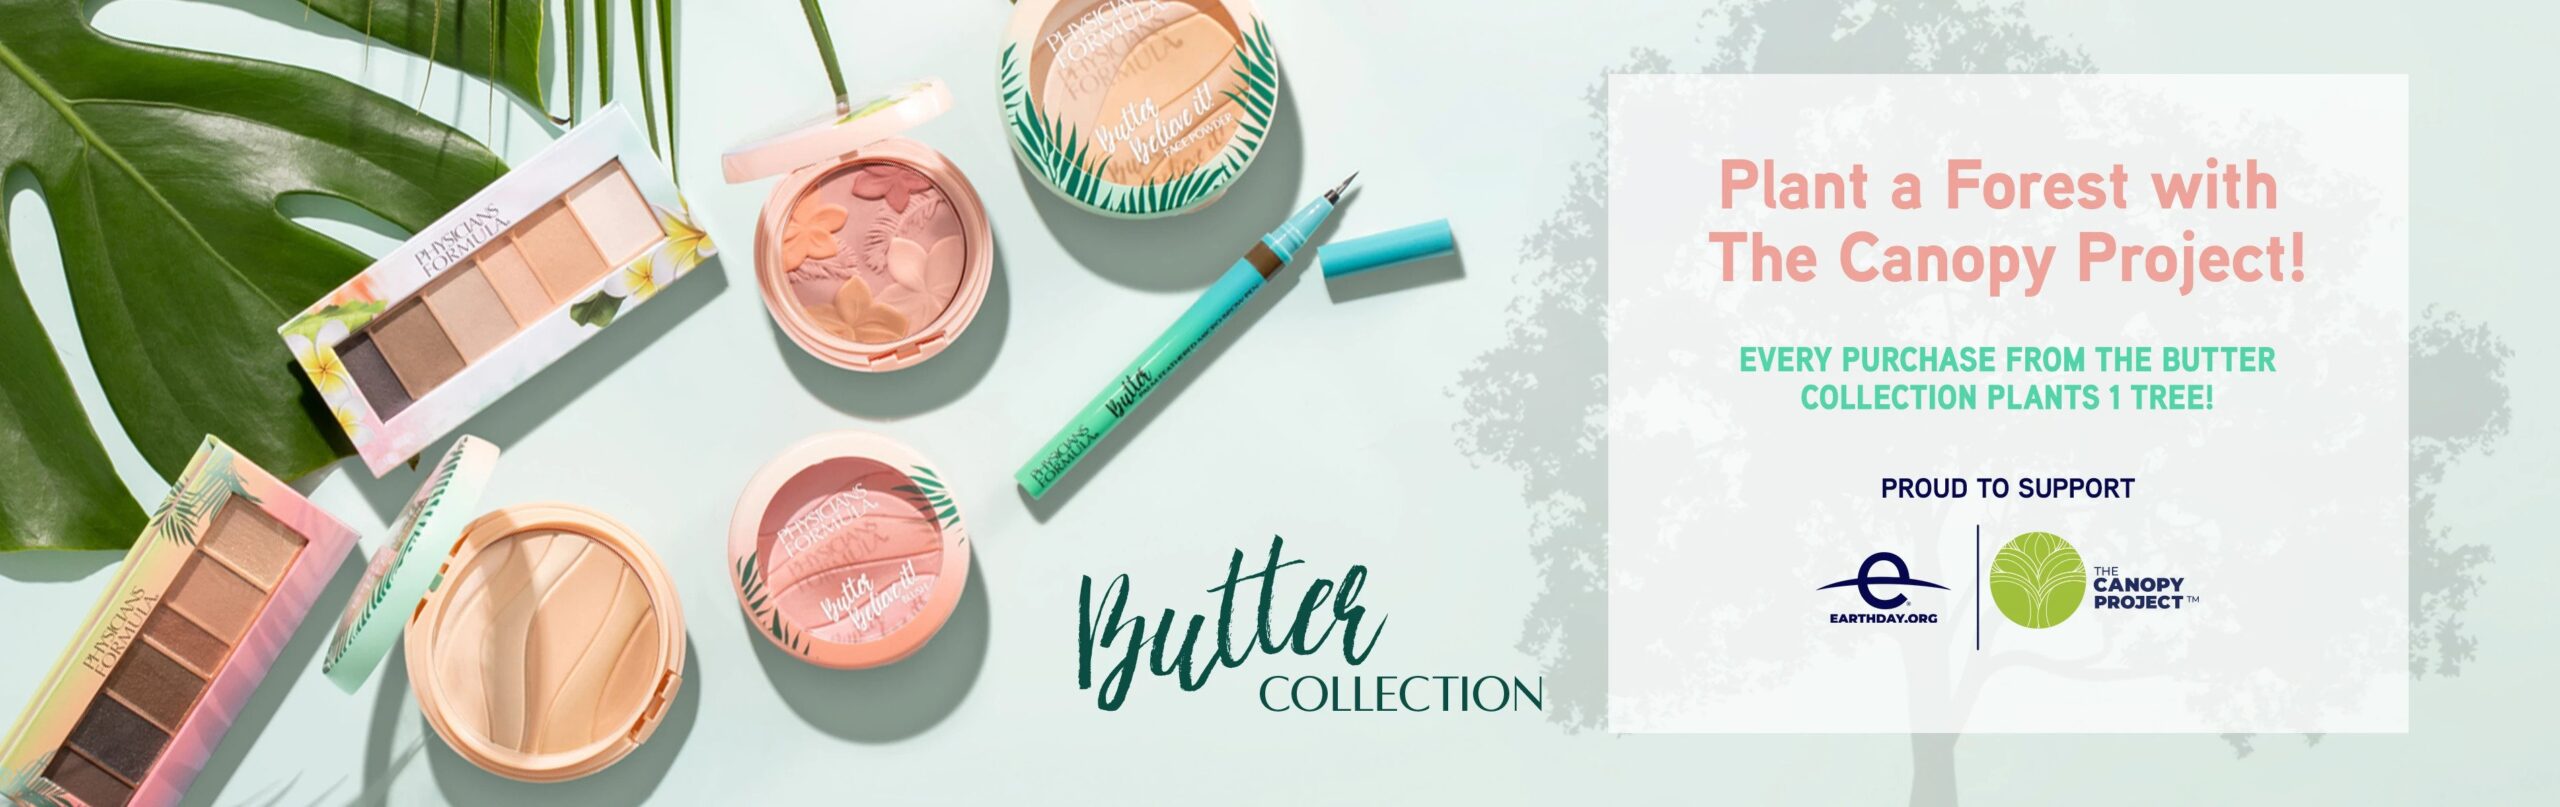 Butter Collection - Plant a Forest with The Canopy Project! Every Purchase from the butter collection plants 1 tree!